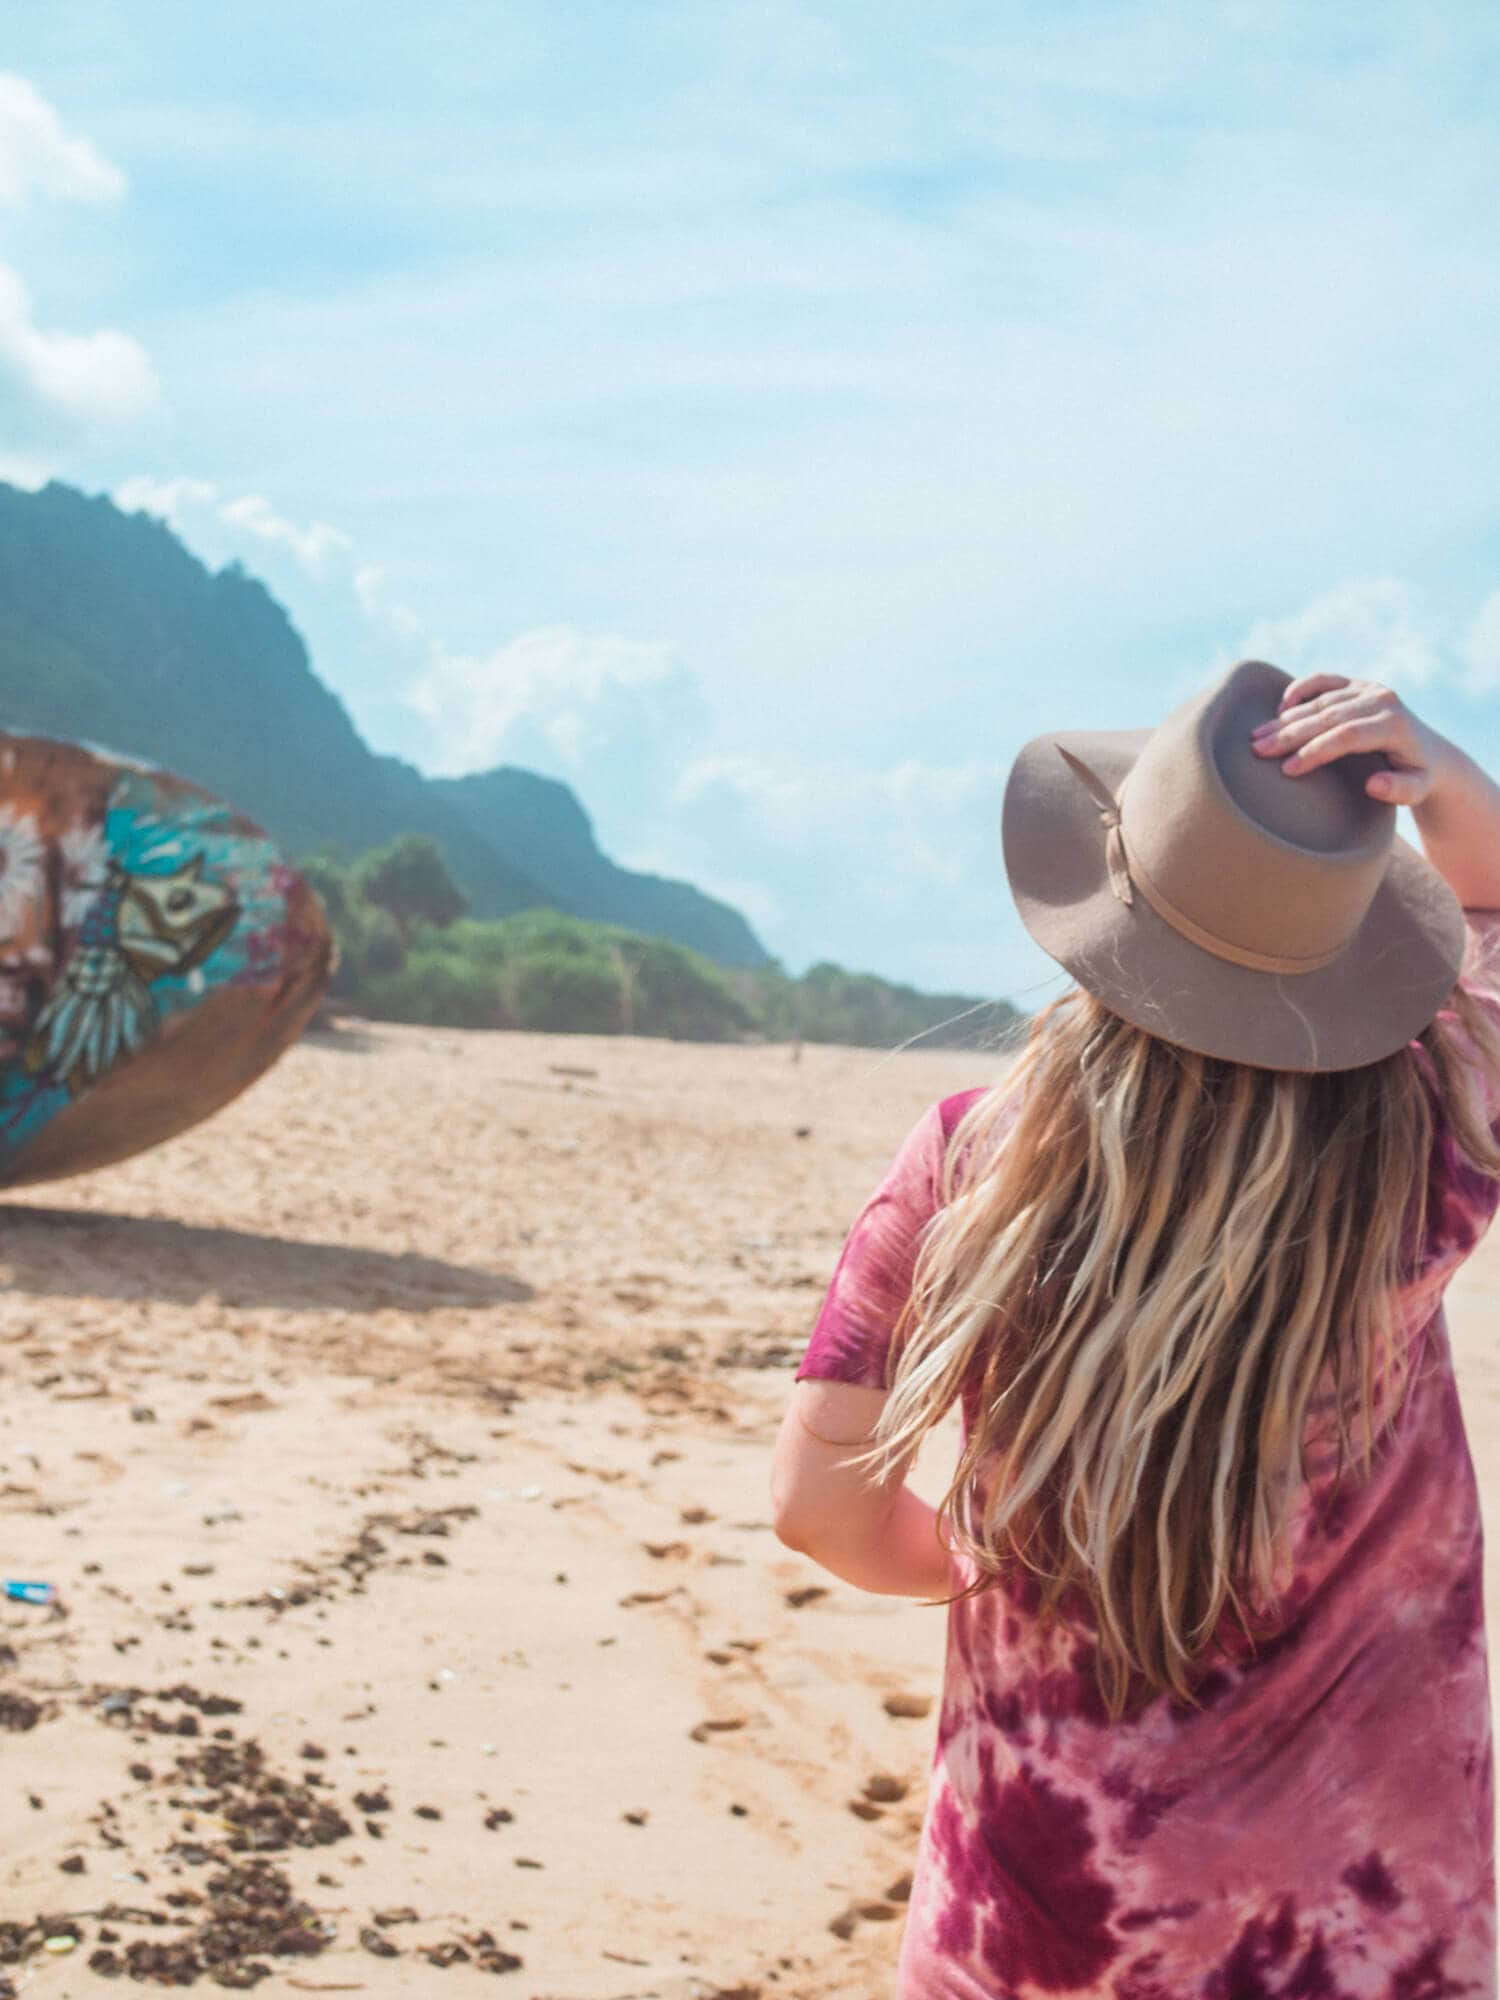 Girl with long dark blonde hair, wearing a purple tie dye dress and beige hat, walking towards a shipwreck on Nunggalan Beach during the rainy season in Bali.